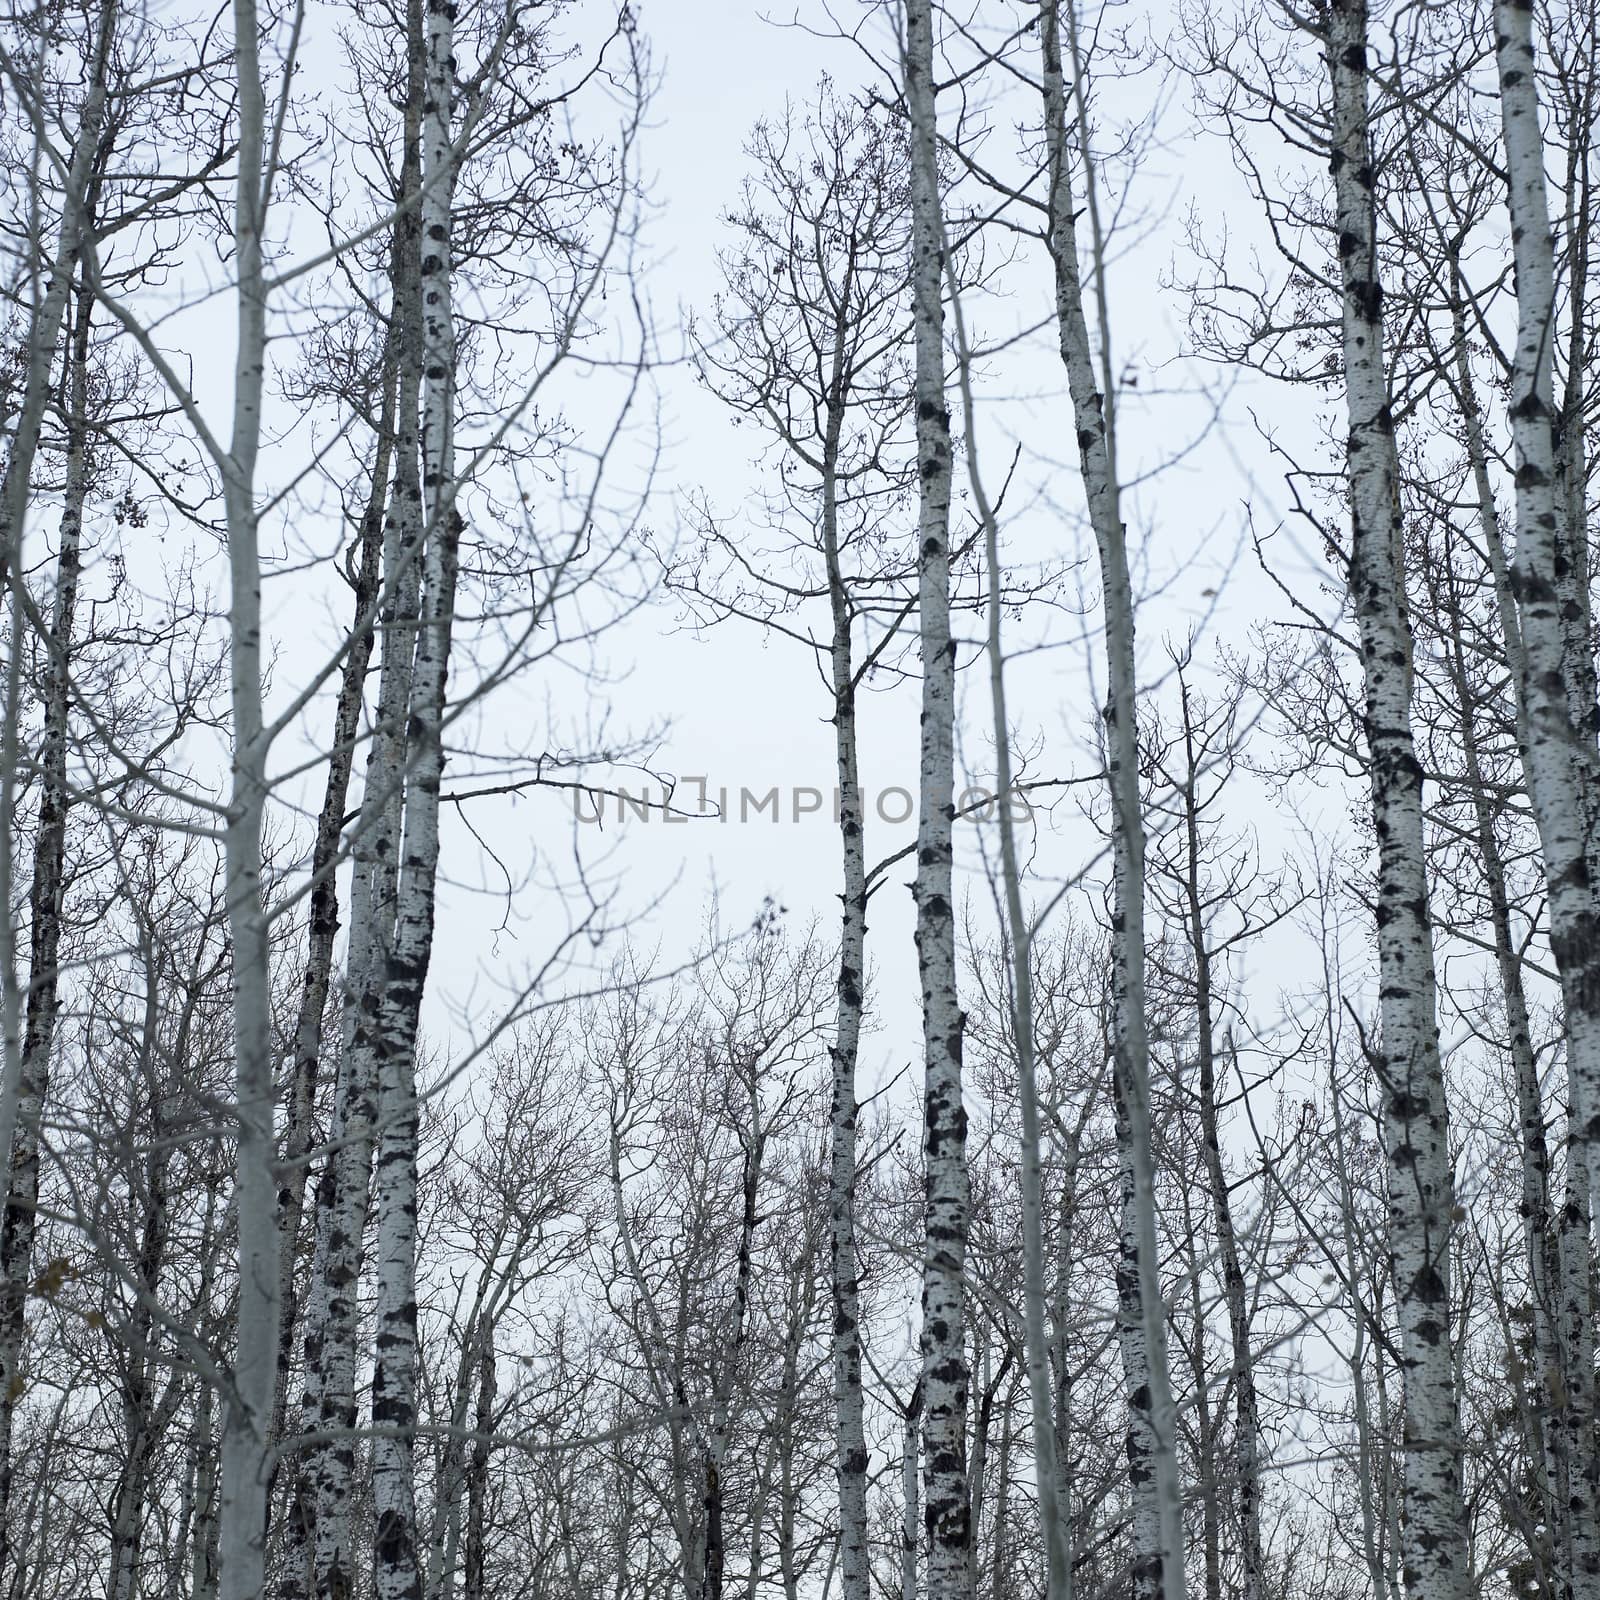 Bare trunks and branches of a leafless birch trees against a misty blue sky